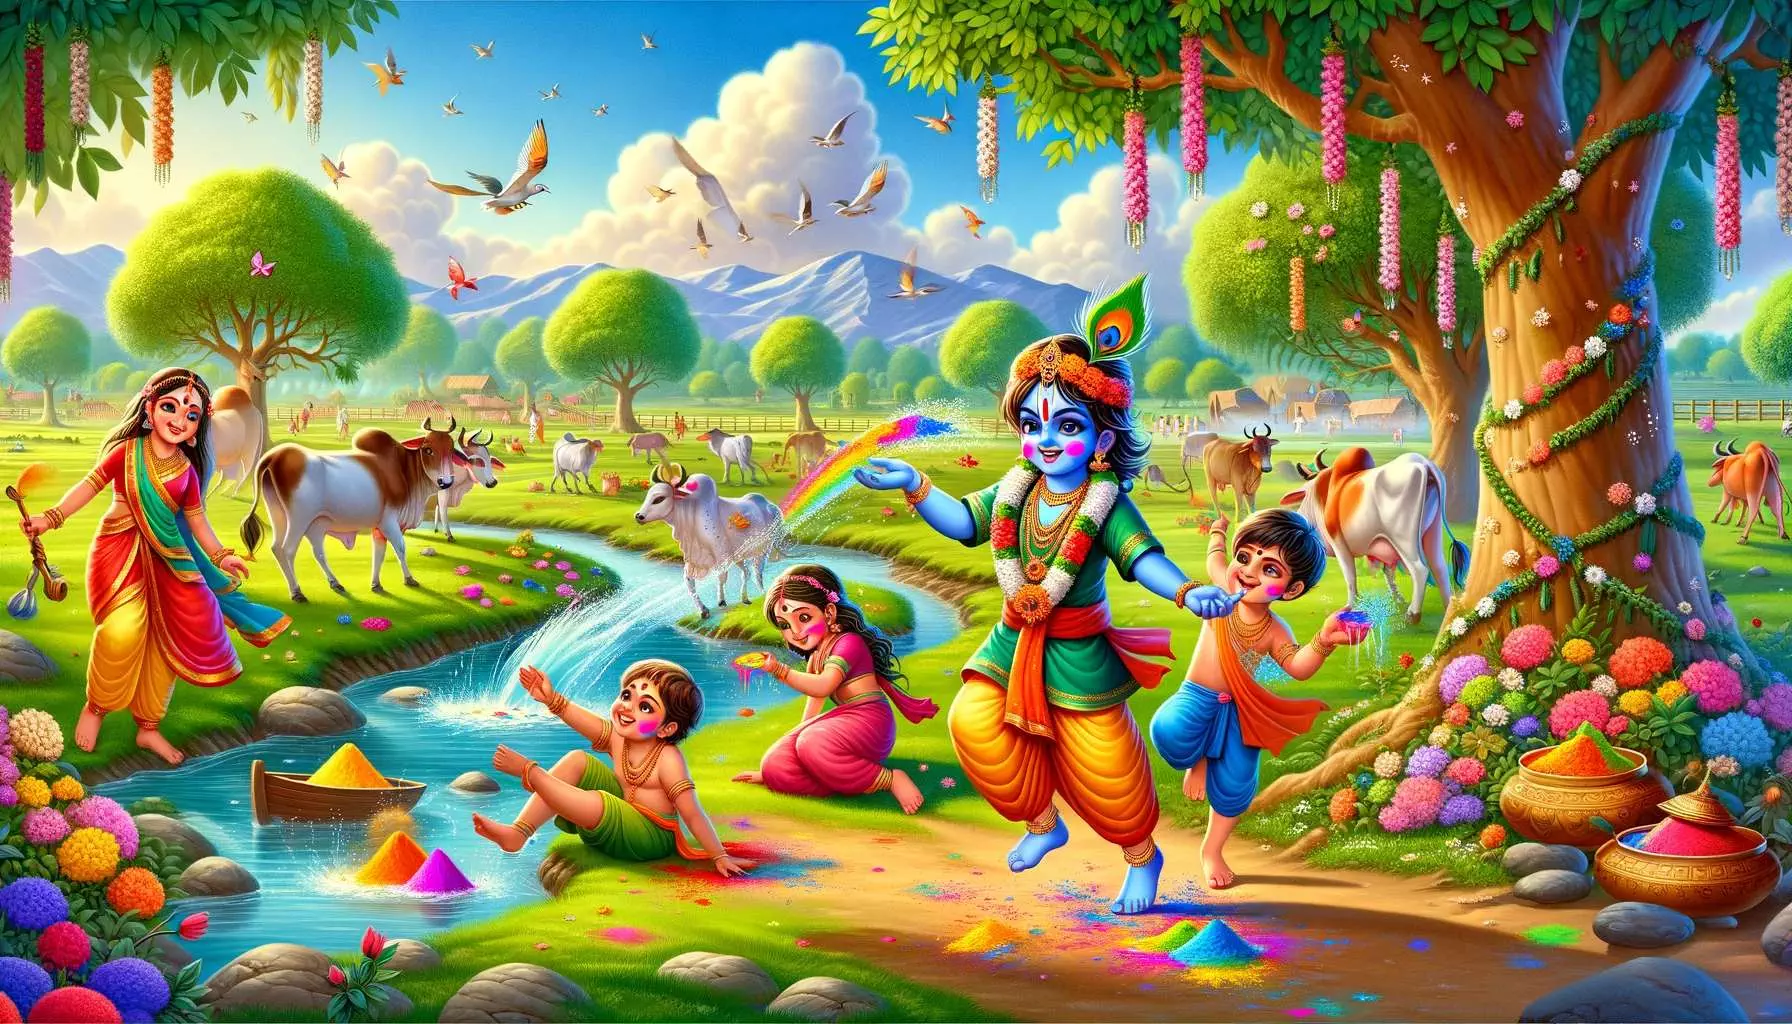 Festive Colors of Holi: Krishna and Friends in Nature's Embrace Image